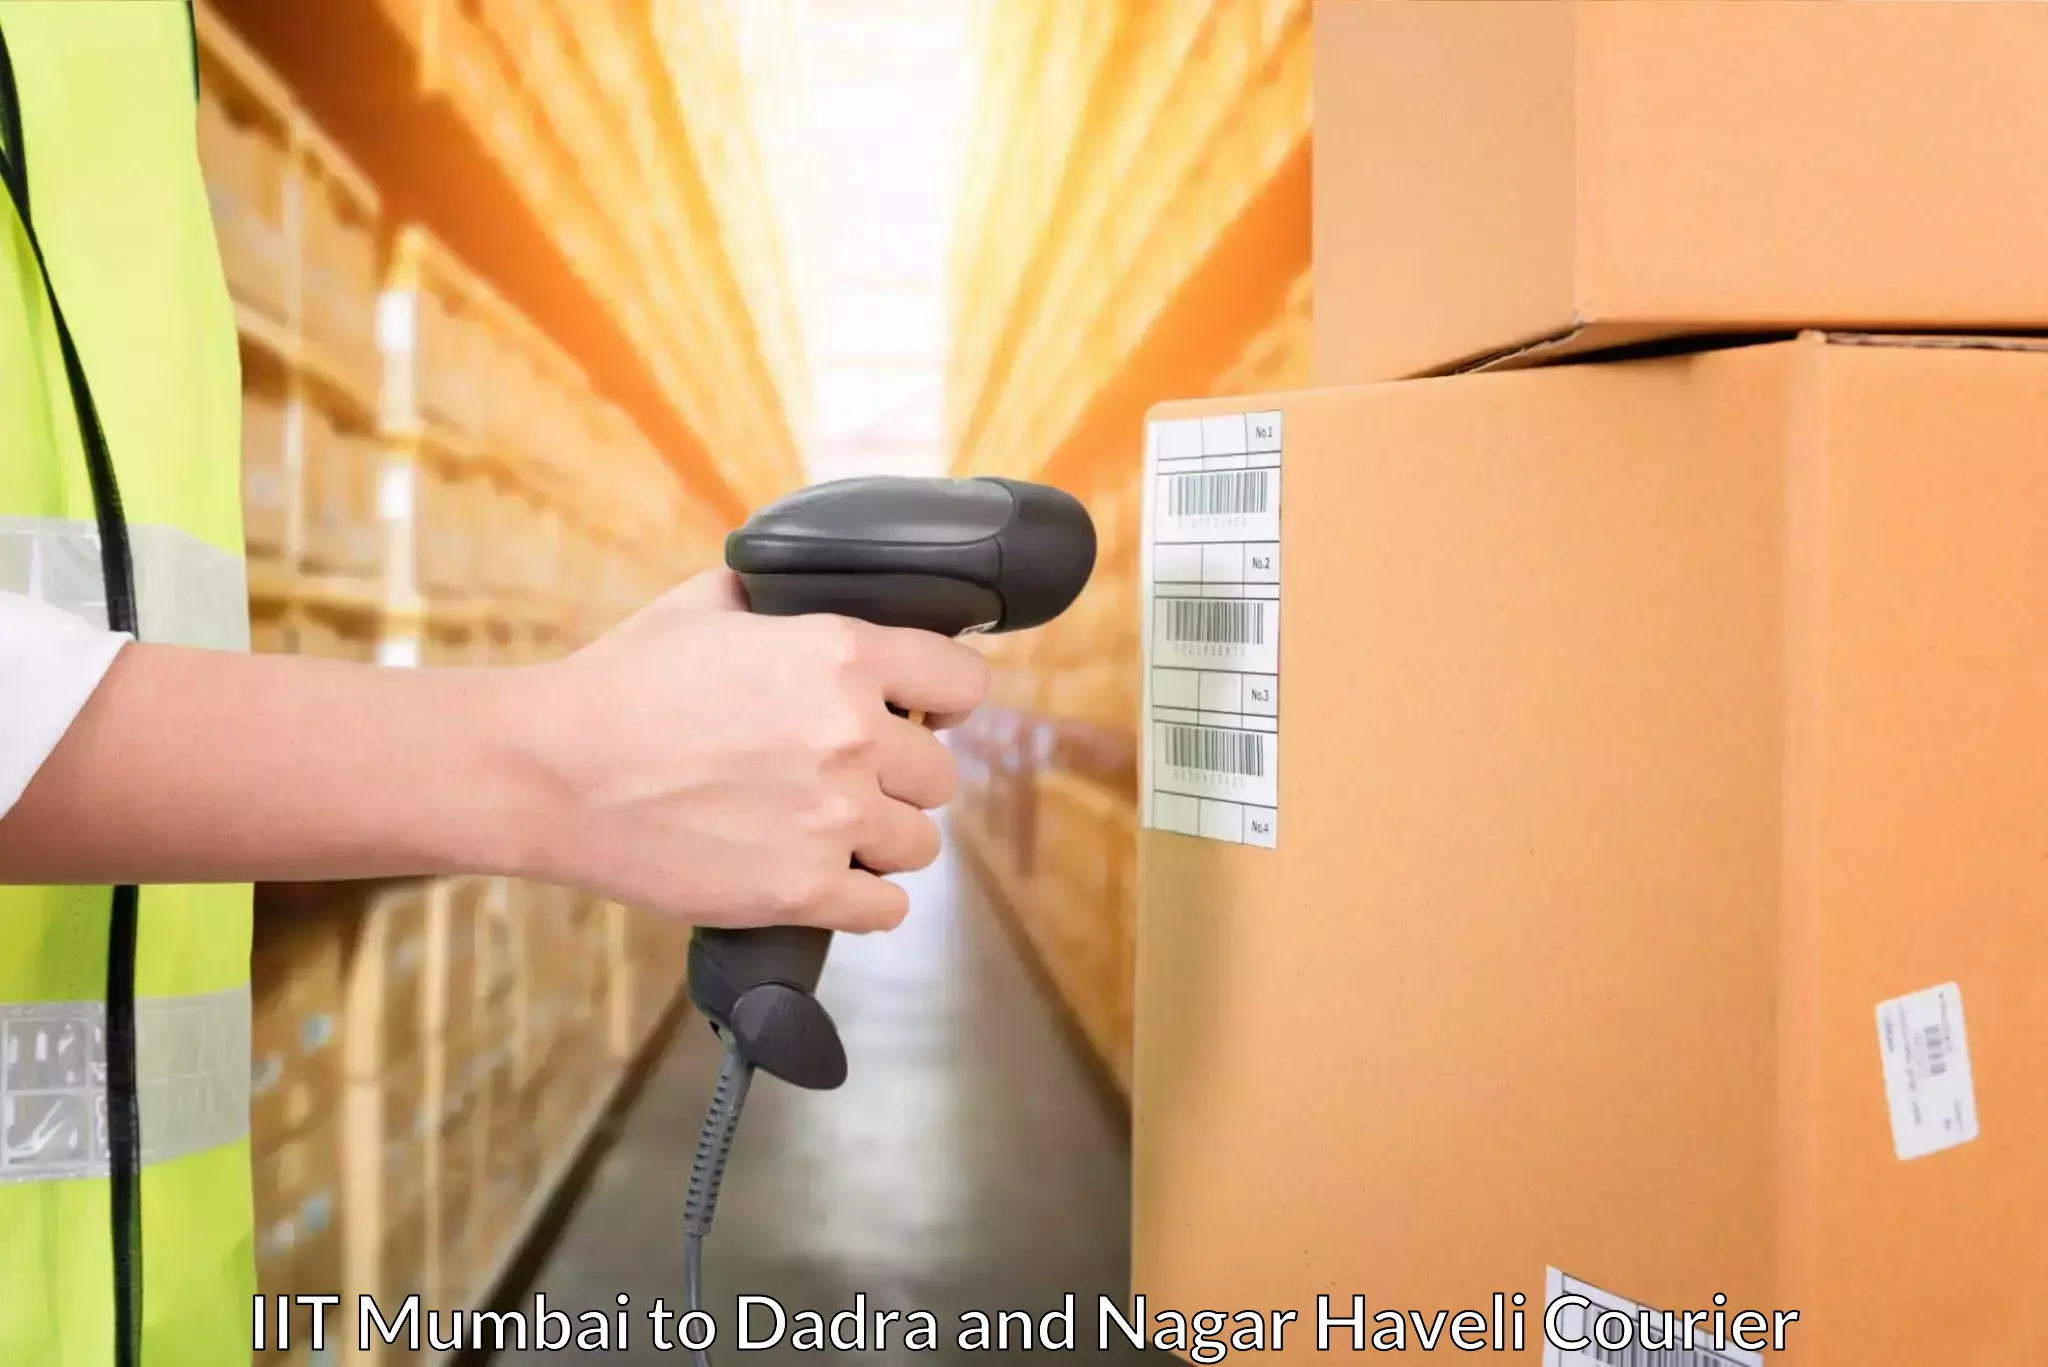 Parcel service for businesses IIT Mumbai to Dadra and Nagar Haveli